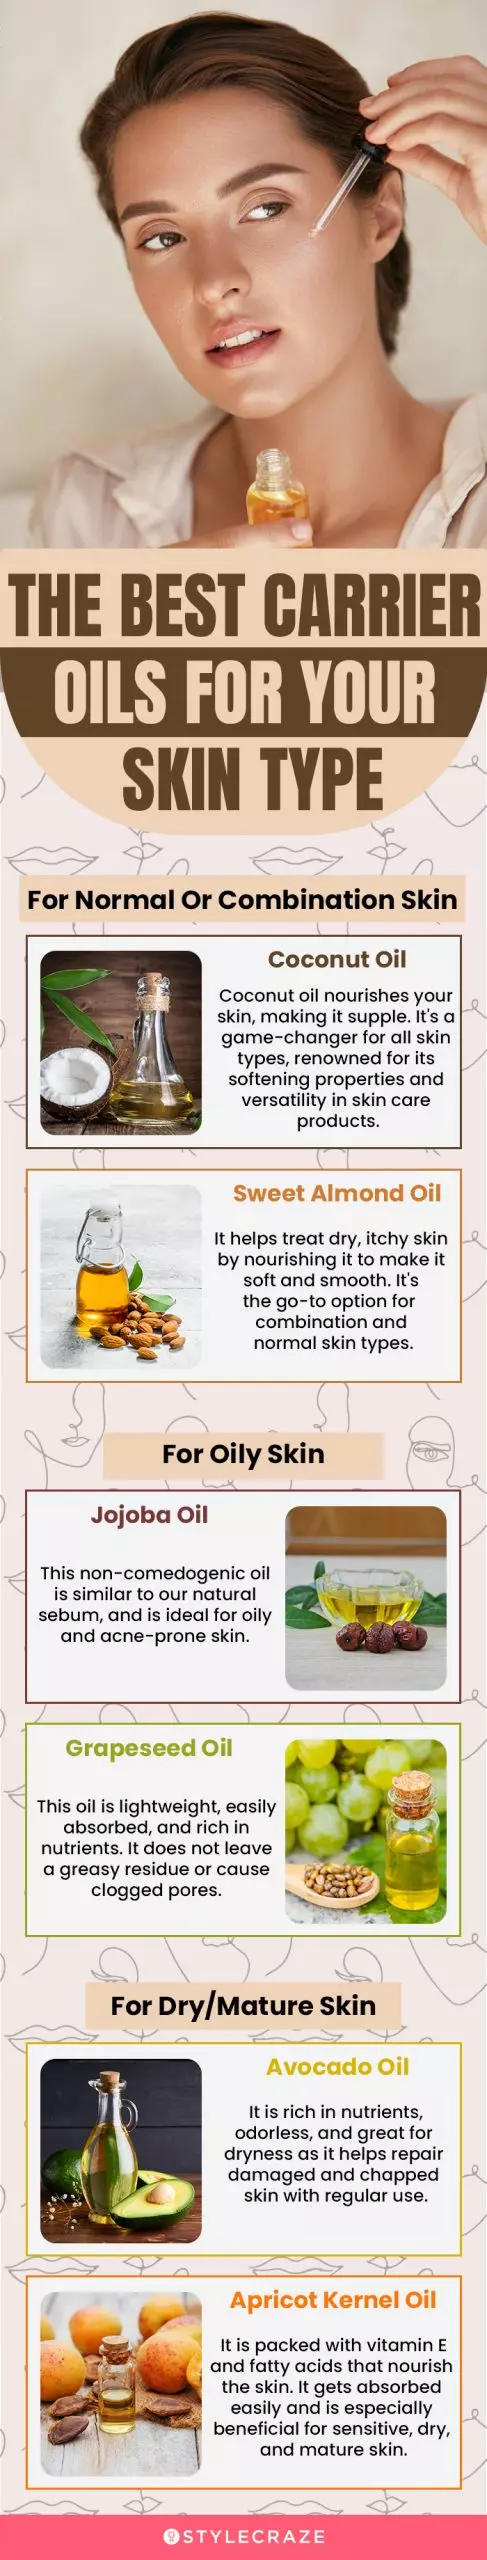 the best carrier oils for your skin type (infographic)